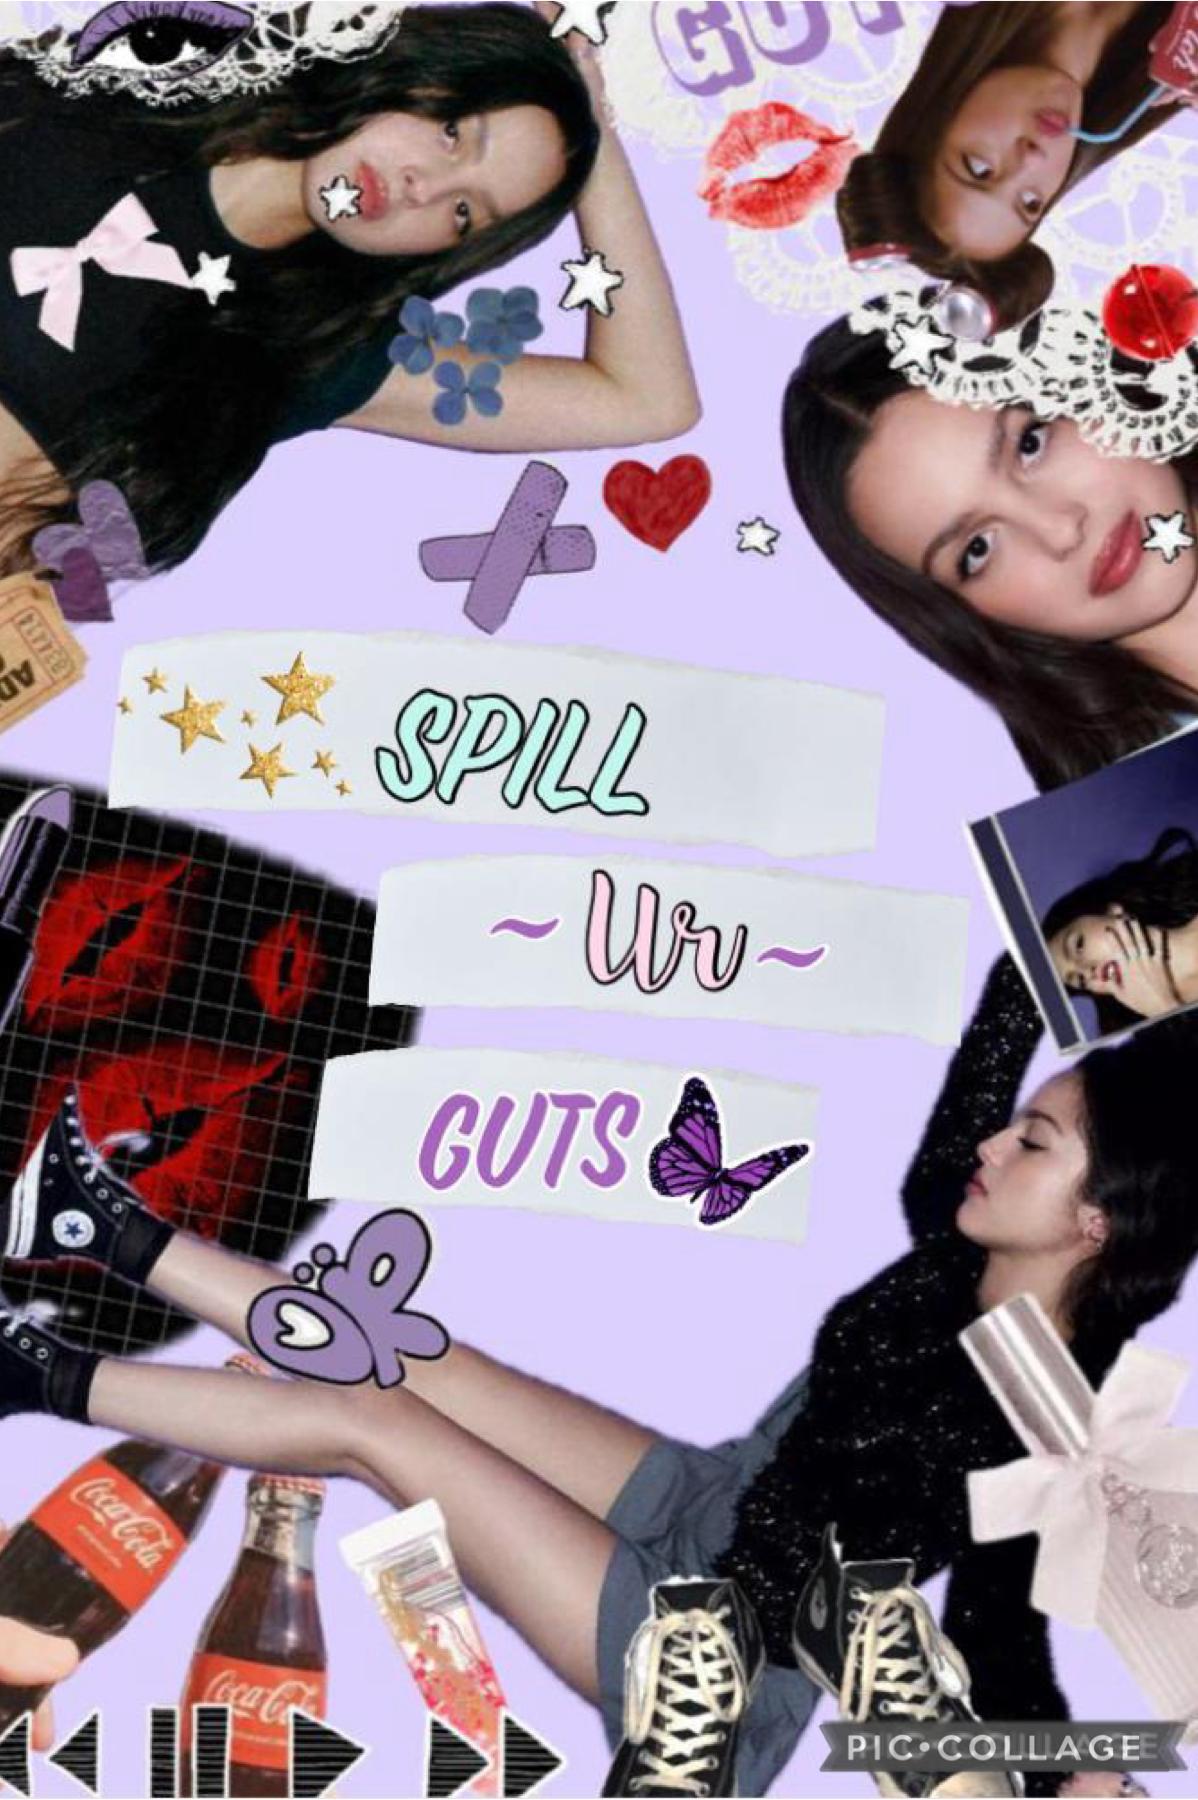 collab with the very talented… @breathin_dreams! olivia rodrigo spill ur guts collage